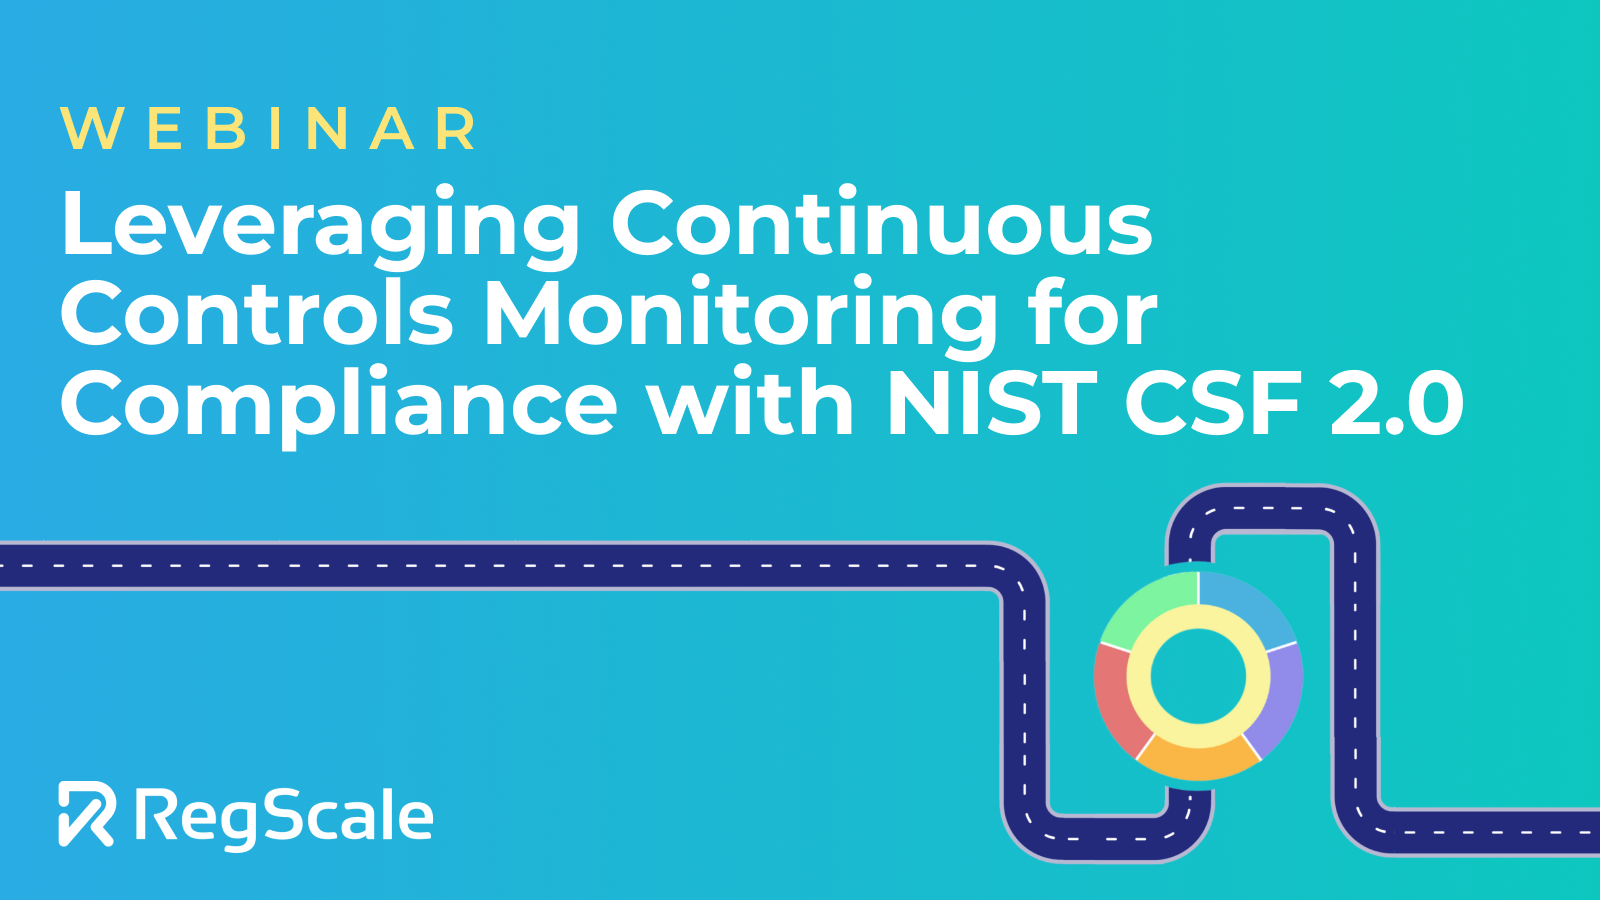 Webinar - Leveraging CCM for Compliance with NIST CSF 2.0